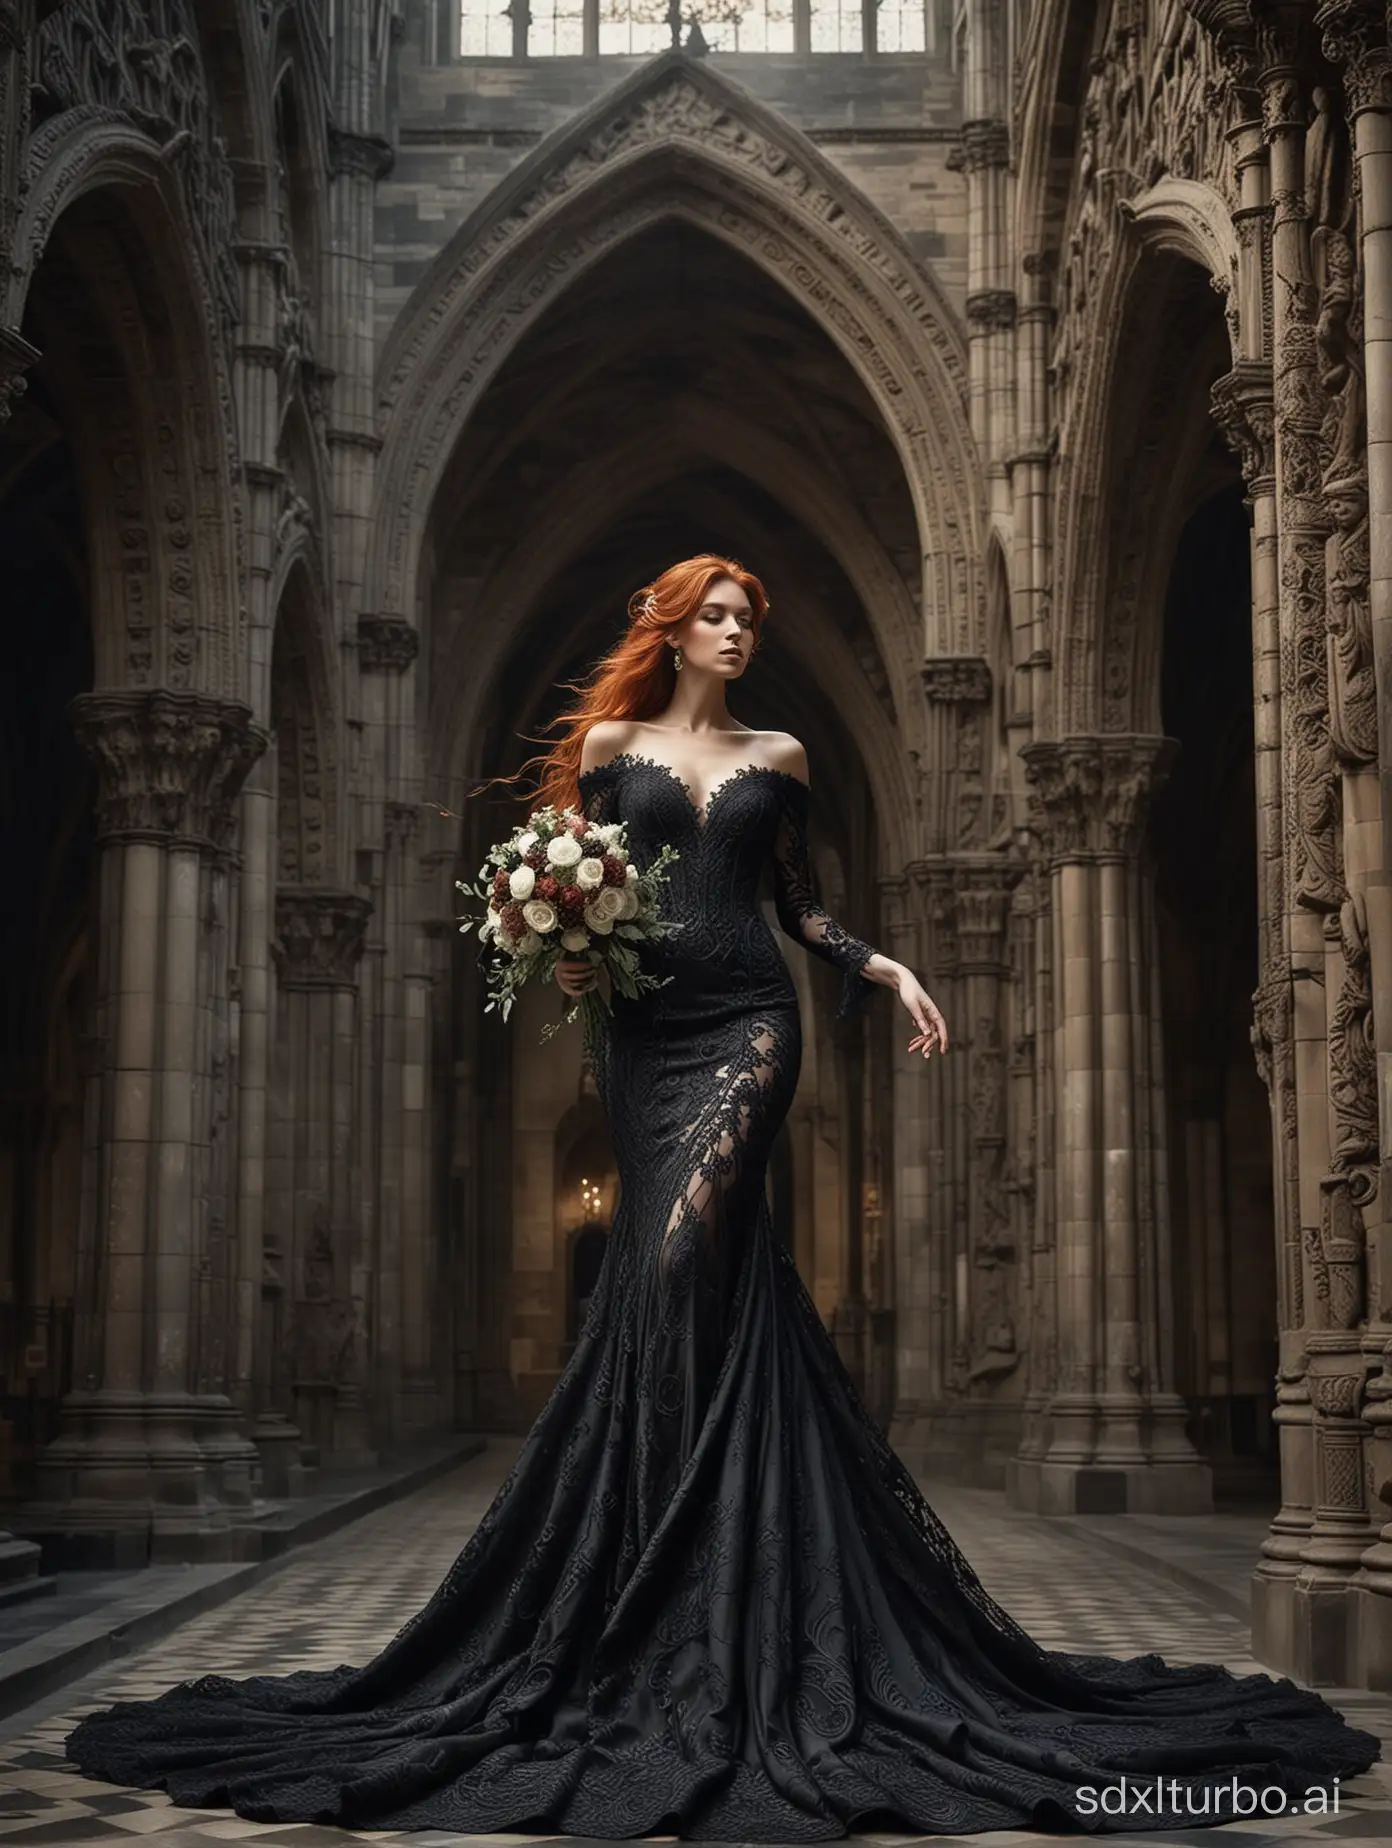 Create an image of a woman depicted in a highly stylized and fantastical manner. She's adorned in an elaborate, dark gown with intricate lace details, complemented by a luxurious, flowing train. Her hair is a vivid auburn, cascading in waves that suggest motion, enhancing the dynamic feel of the image. The setting appears to be a Gothic cathedral or a similarly architectured space, with detailed stonework and towering columns. She holds an ornate bouquet, which, like her dress, is monochromatic, creating a striking contrast with the warmth of her hair. The image exudes a sense of opulence and fantasy.